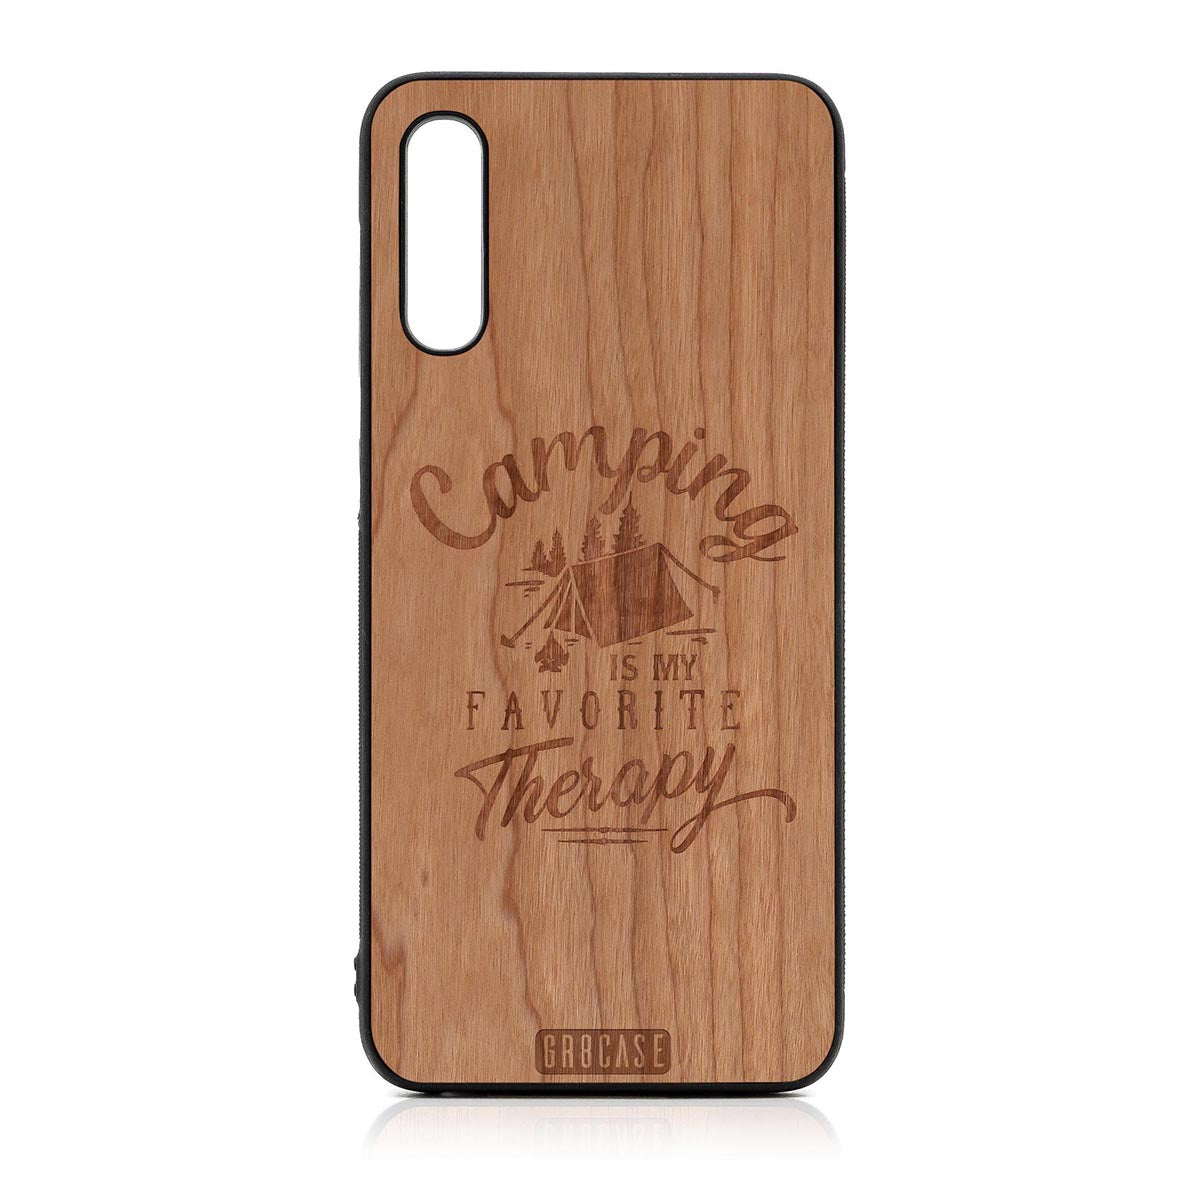 Camping Is My Favorite Therapy Design Wood Case For Samsung Galaxy A50 by GR8CASE